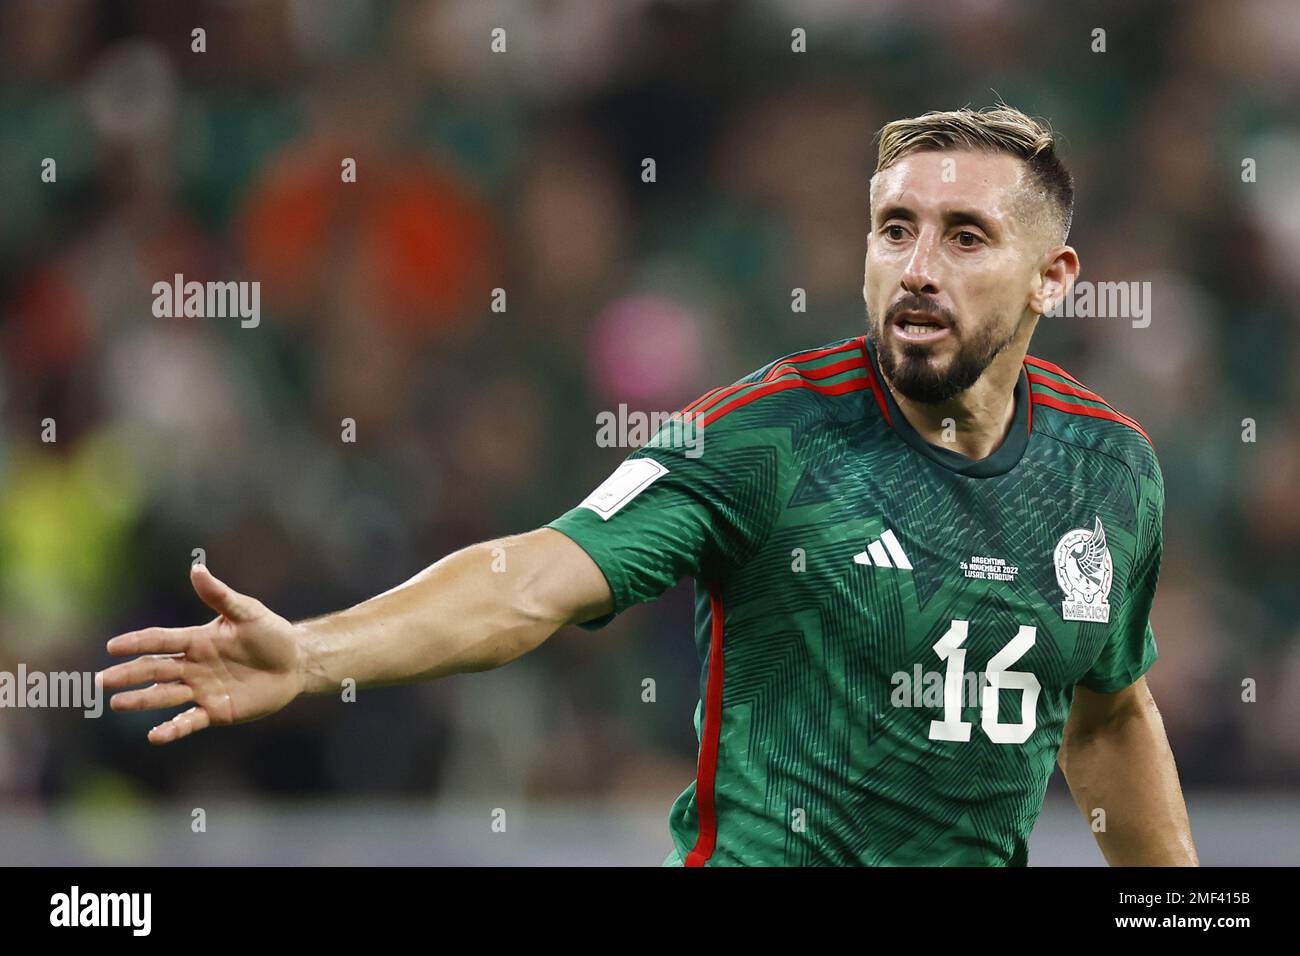 LUSAIL CITY - Hector Herrera of Mexico during the FIFA World Cup Qatar 2022 group C match between Argentina and Mexico at Lusail Stadium on November 26, 2022 in Lusail City, Qatar. AP | Dutch Height | MAURICE OF STONE Stock Photo